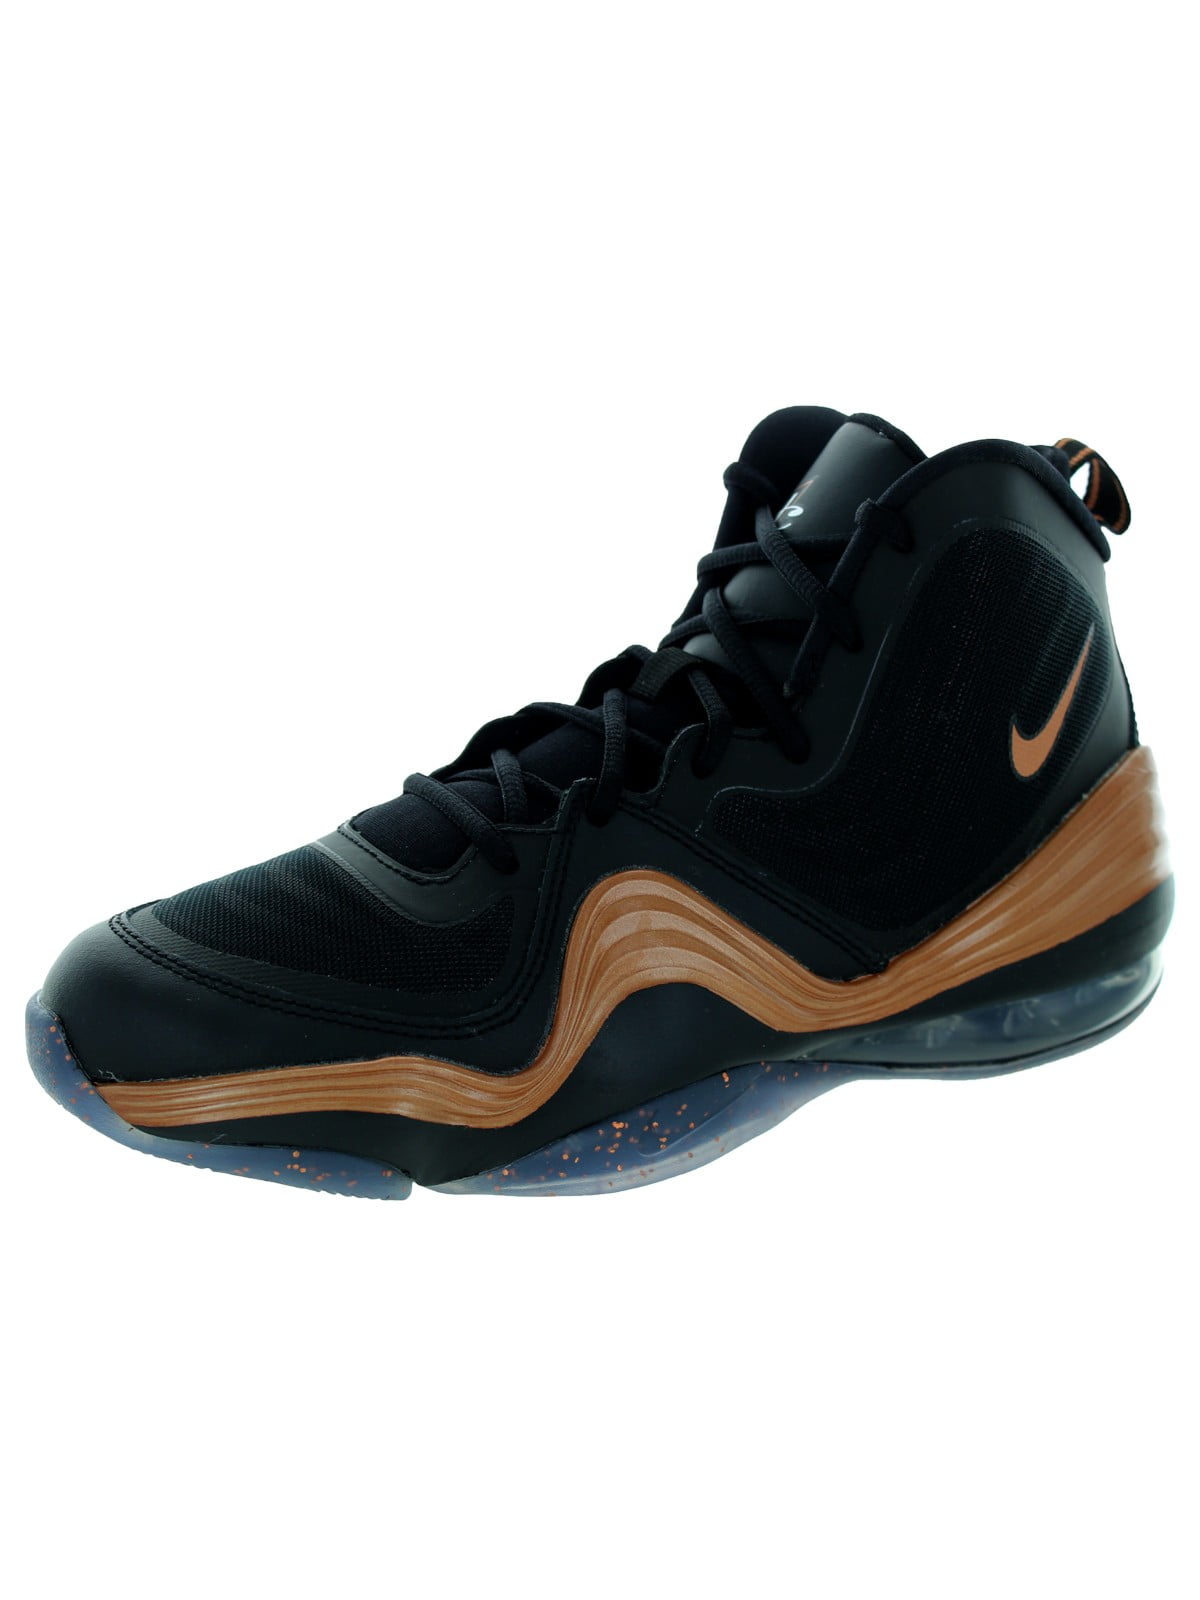 gs basketball shoes